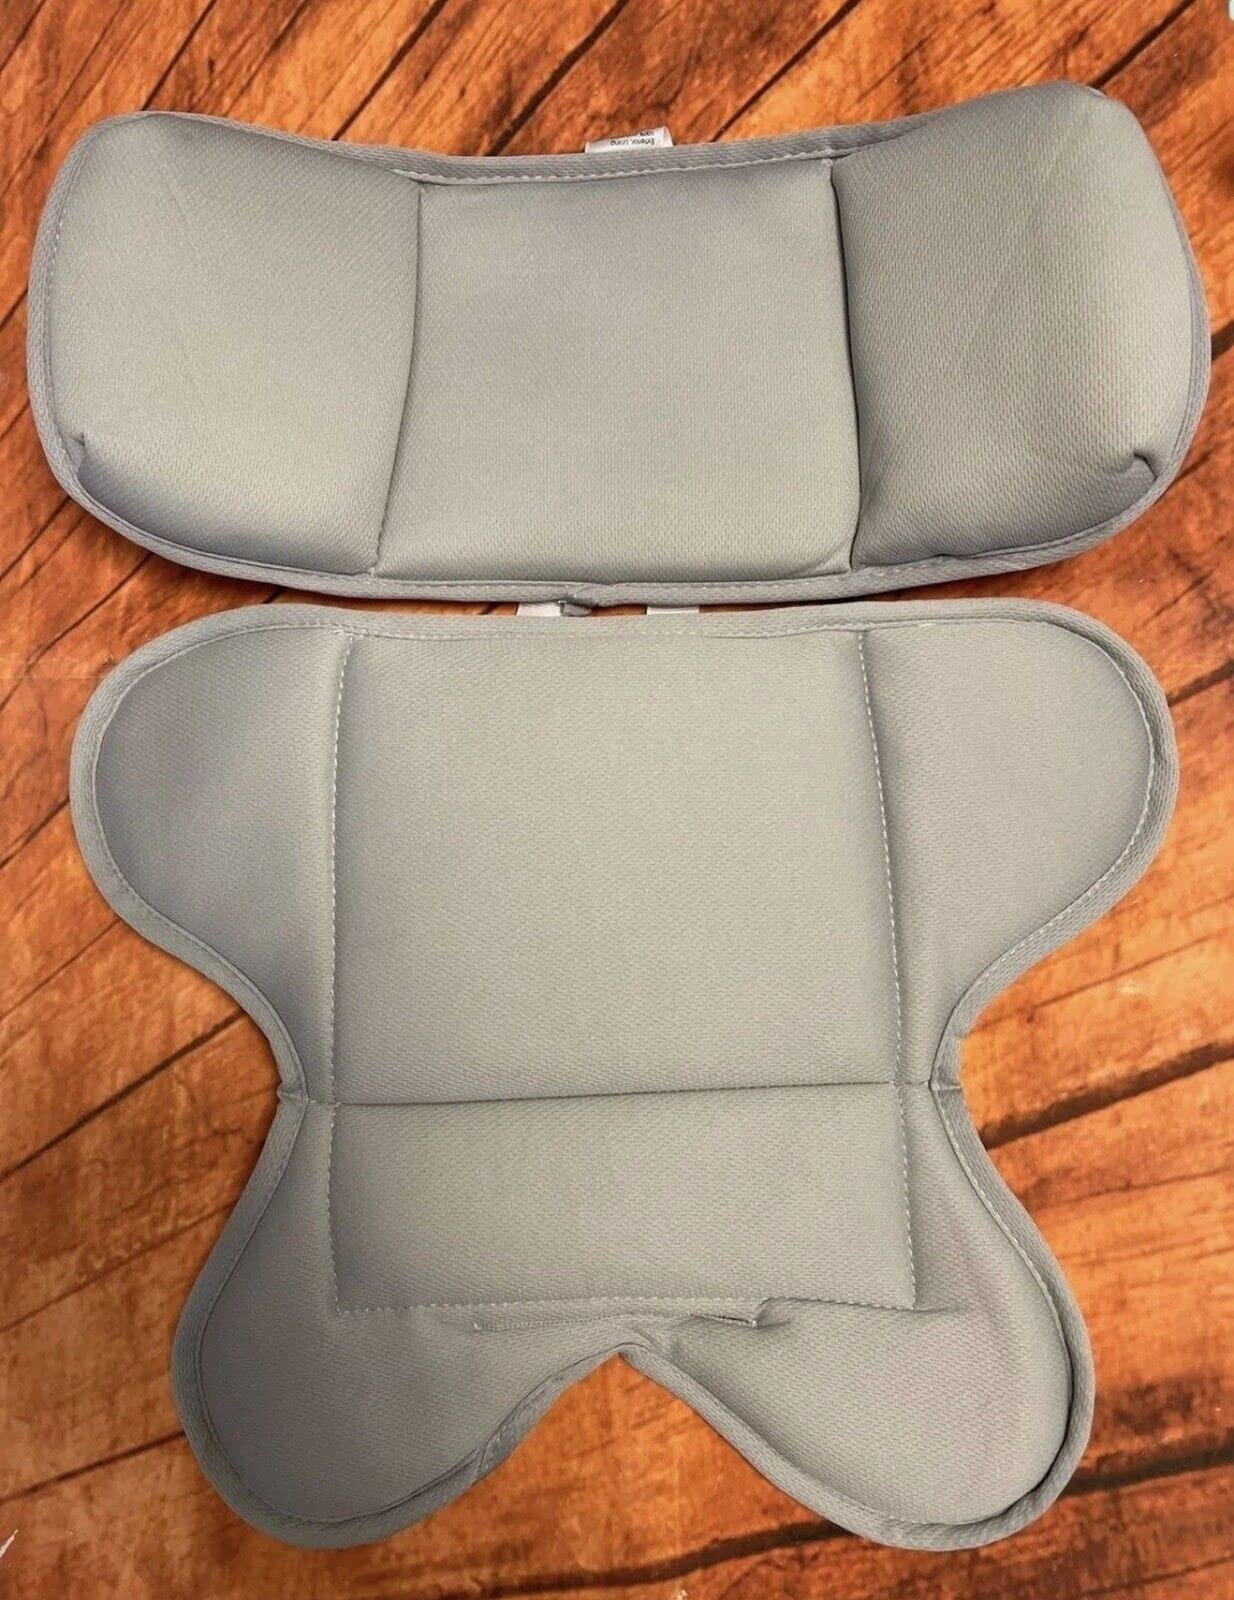 Stilnati Car Seat Protector Infant Head and Body Pillow Baby Insert Infant Soft Grey Insert Baby Waterproof Portable Liner Convertible Pads Carseat Stroller Accessories Machine Washable Seat